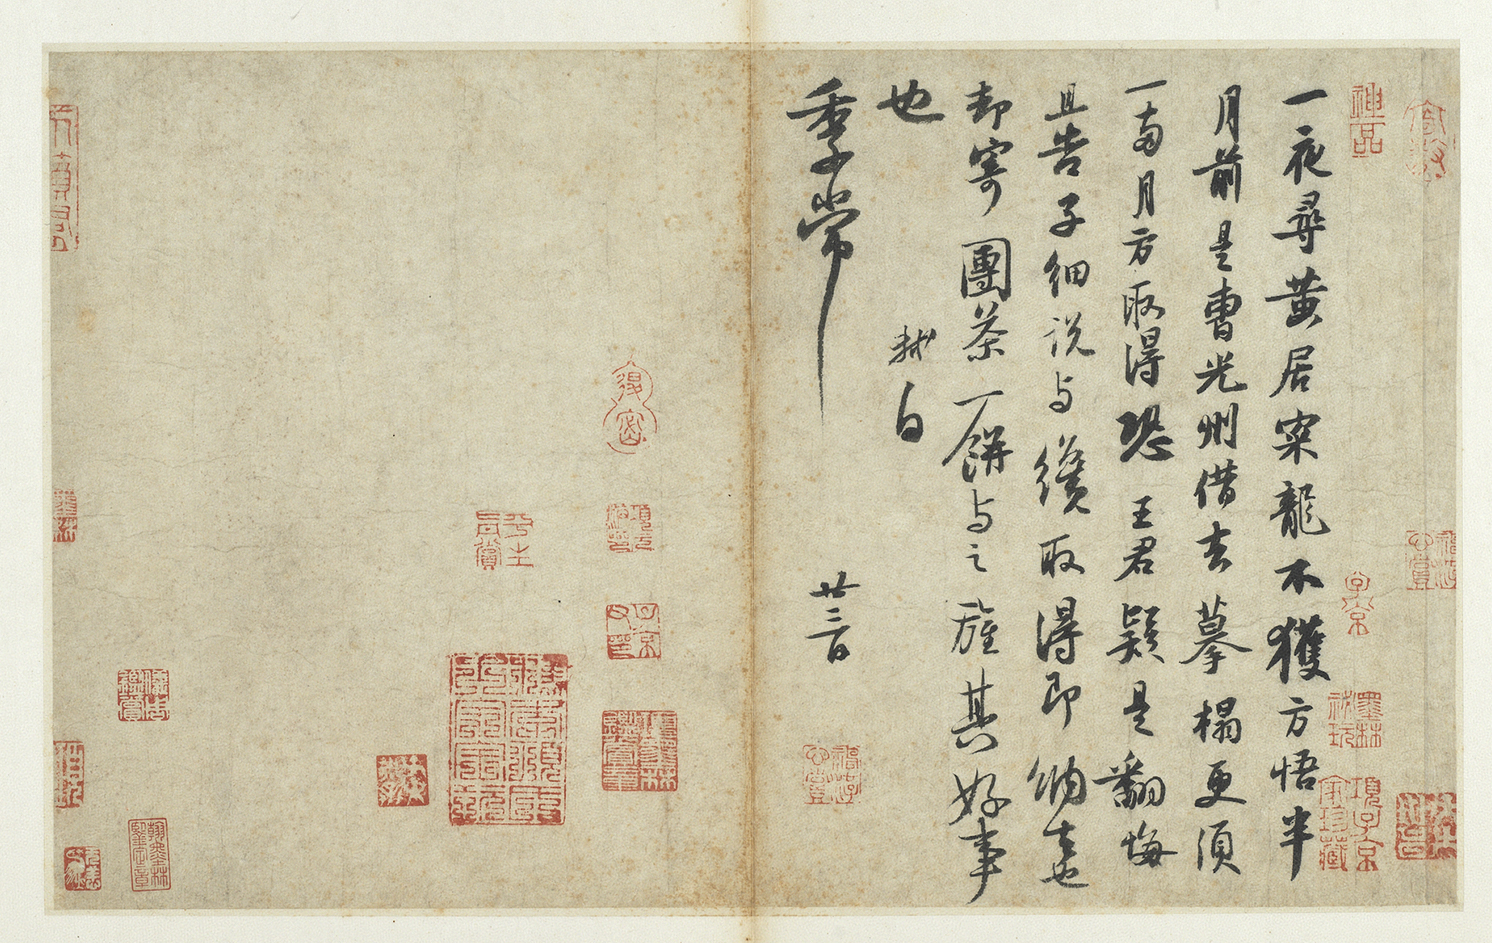 Letter to Jichang